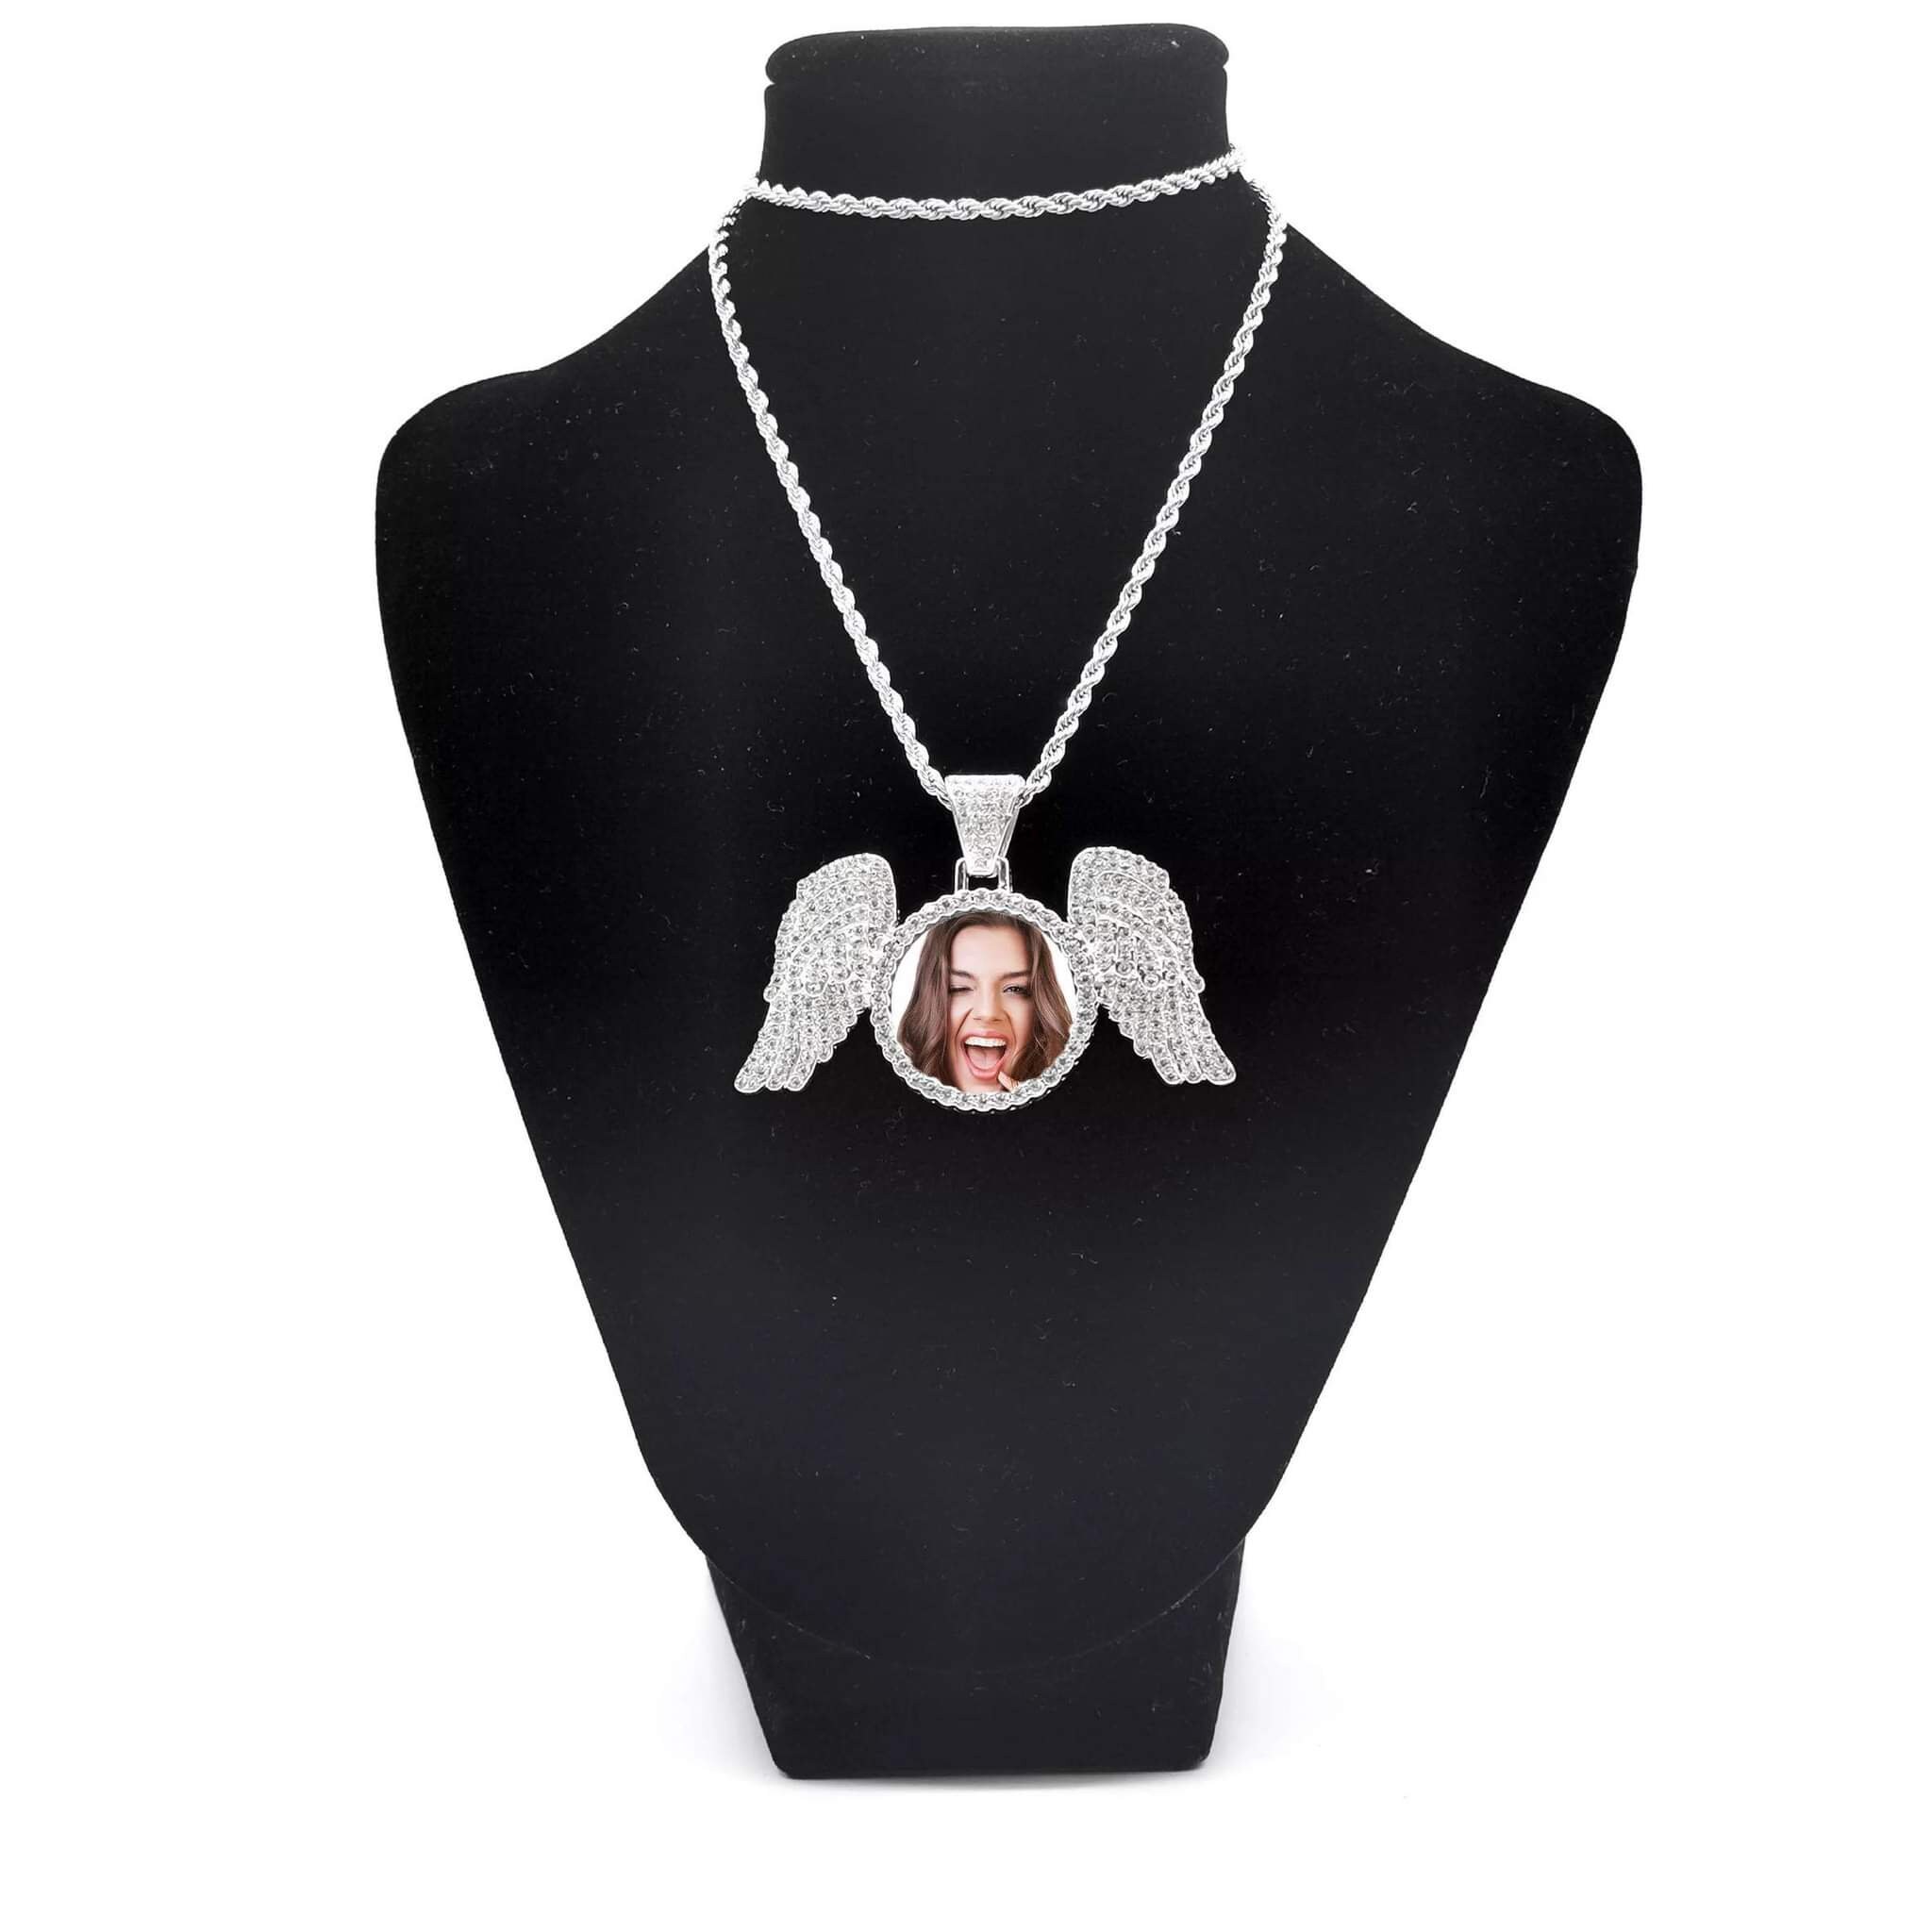 DazzleArt Angel Wing Christmas Necklace Blanks: Sublimation